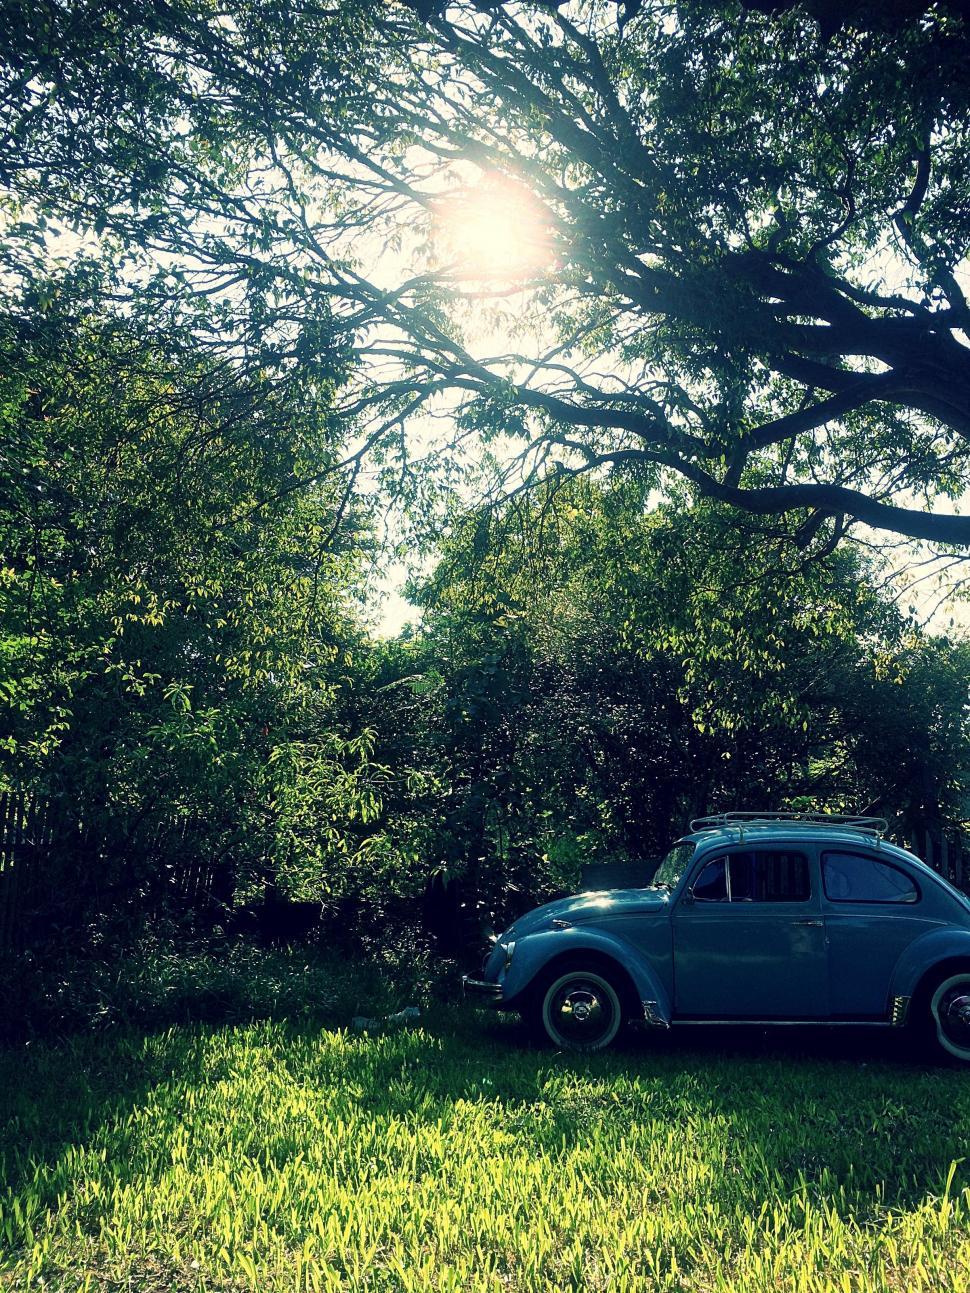 Free Image of Vintage Car on Grass With Sunlight  